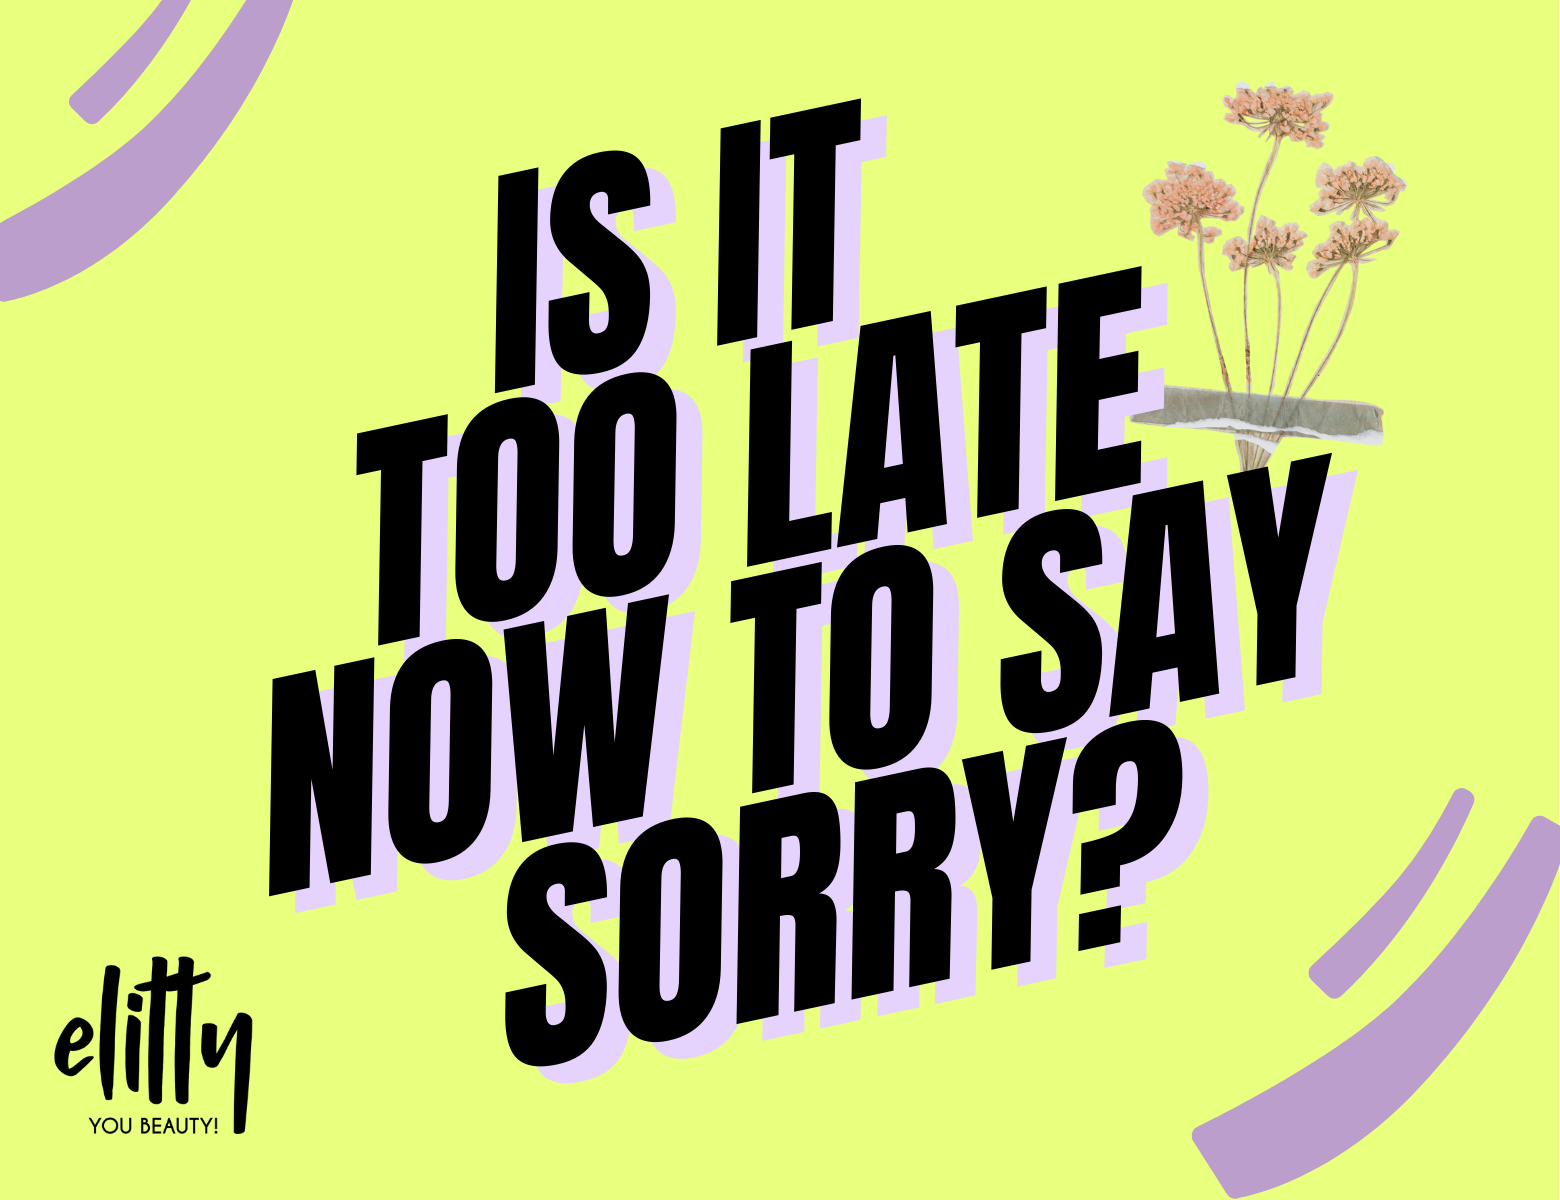 It is too late now to say sorry!